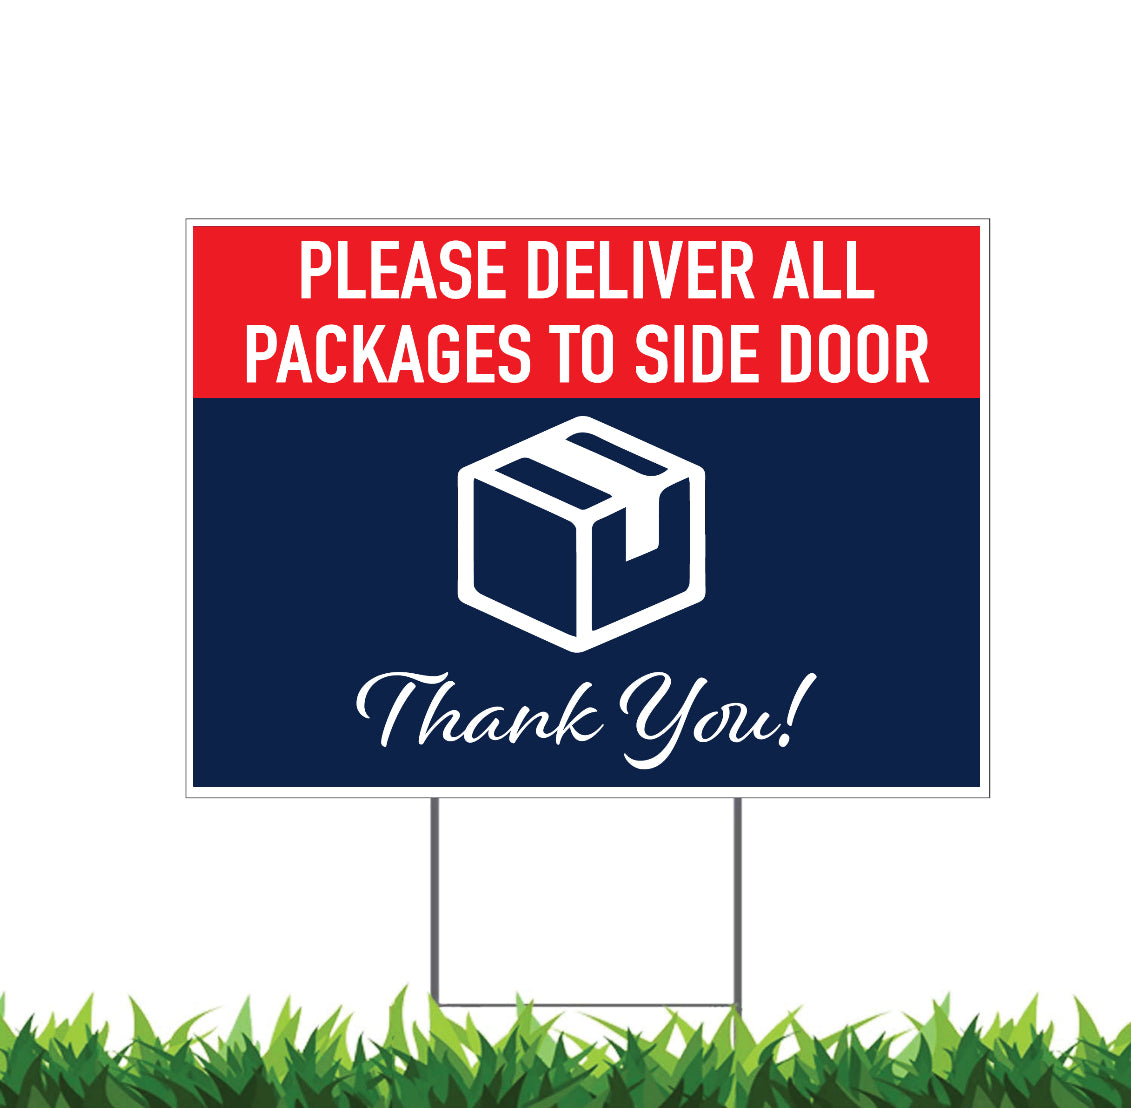 Deliver Packages to Side Door, Yard Sign, 18x12, 24x18, 36x24, H-Stake Included